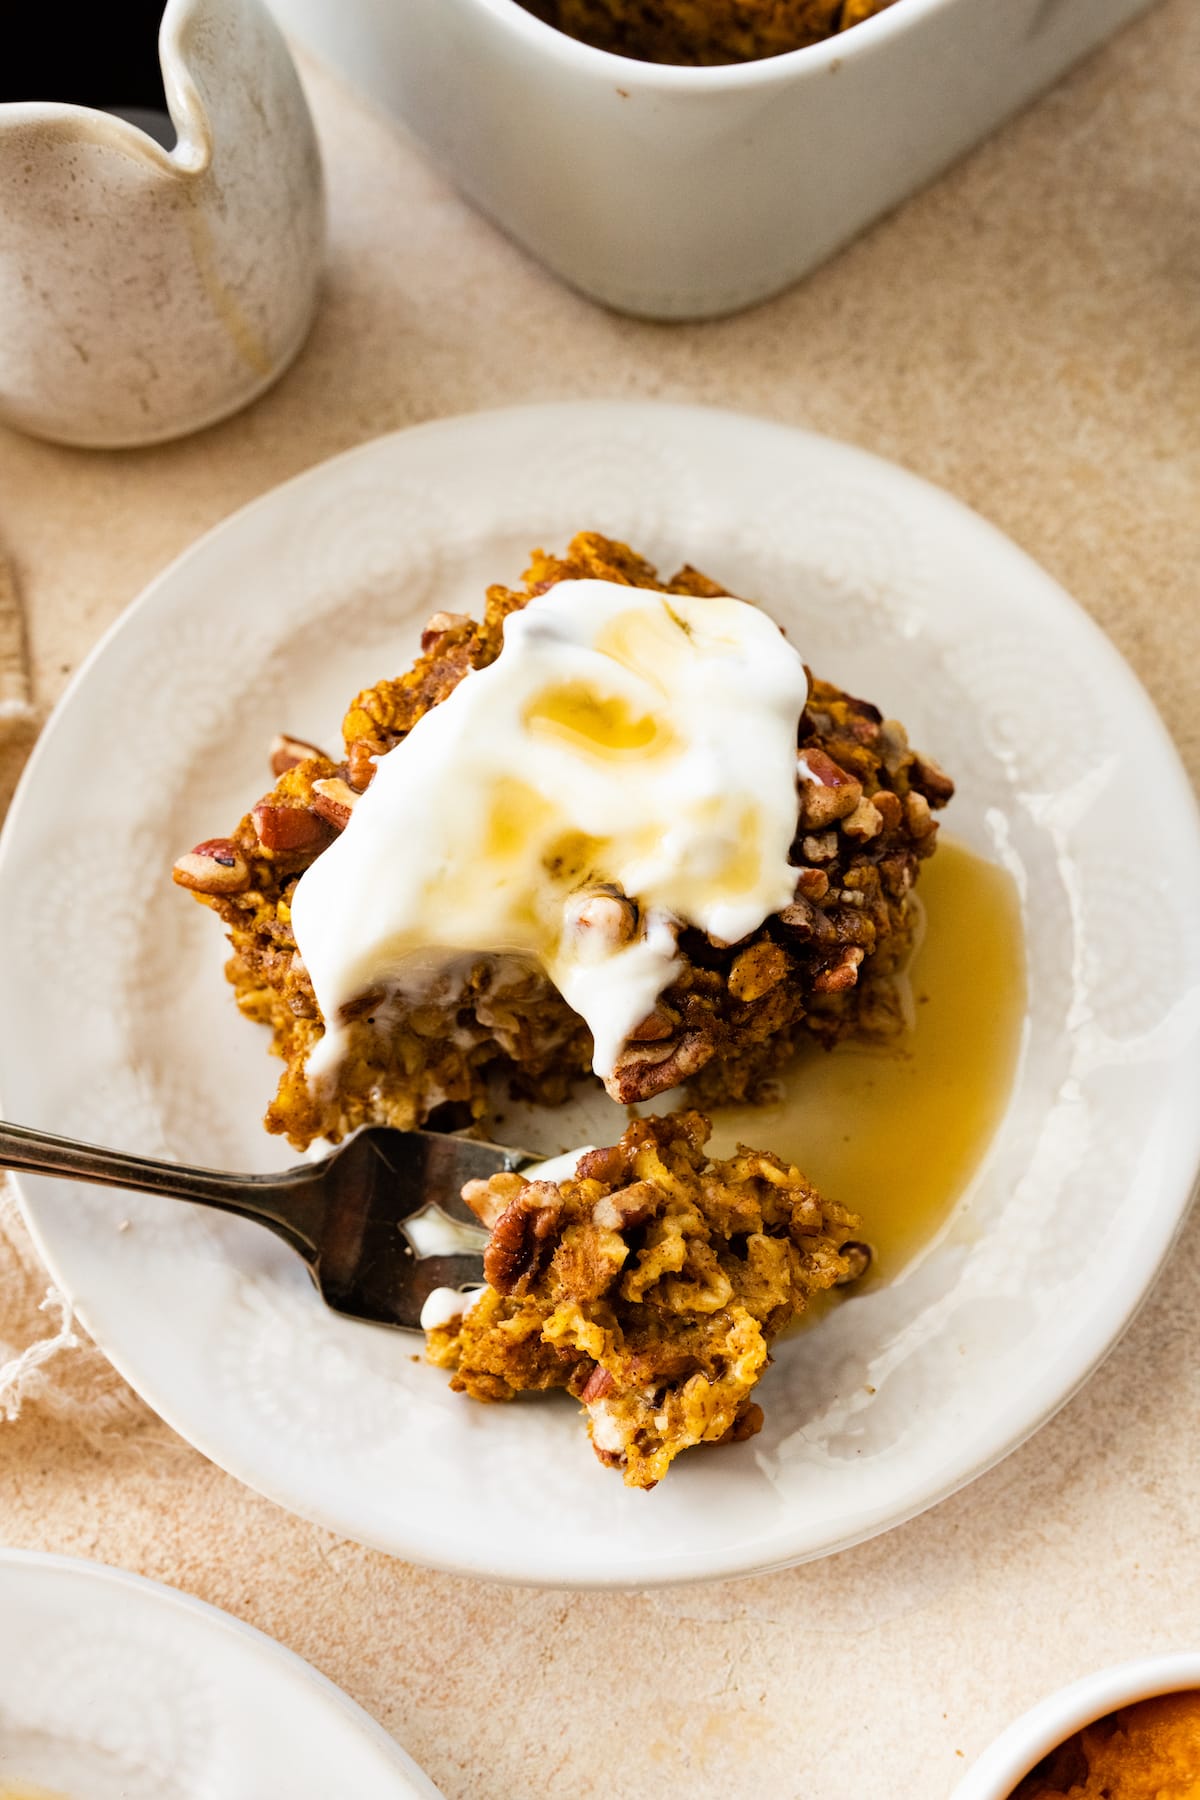 A serving of pumpkin baked oatmeal on a small white plate with fork taking a small piece from it. The slice has a whipped cream and maple syrup topping.